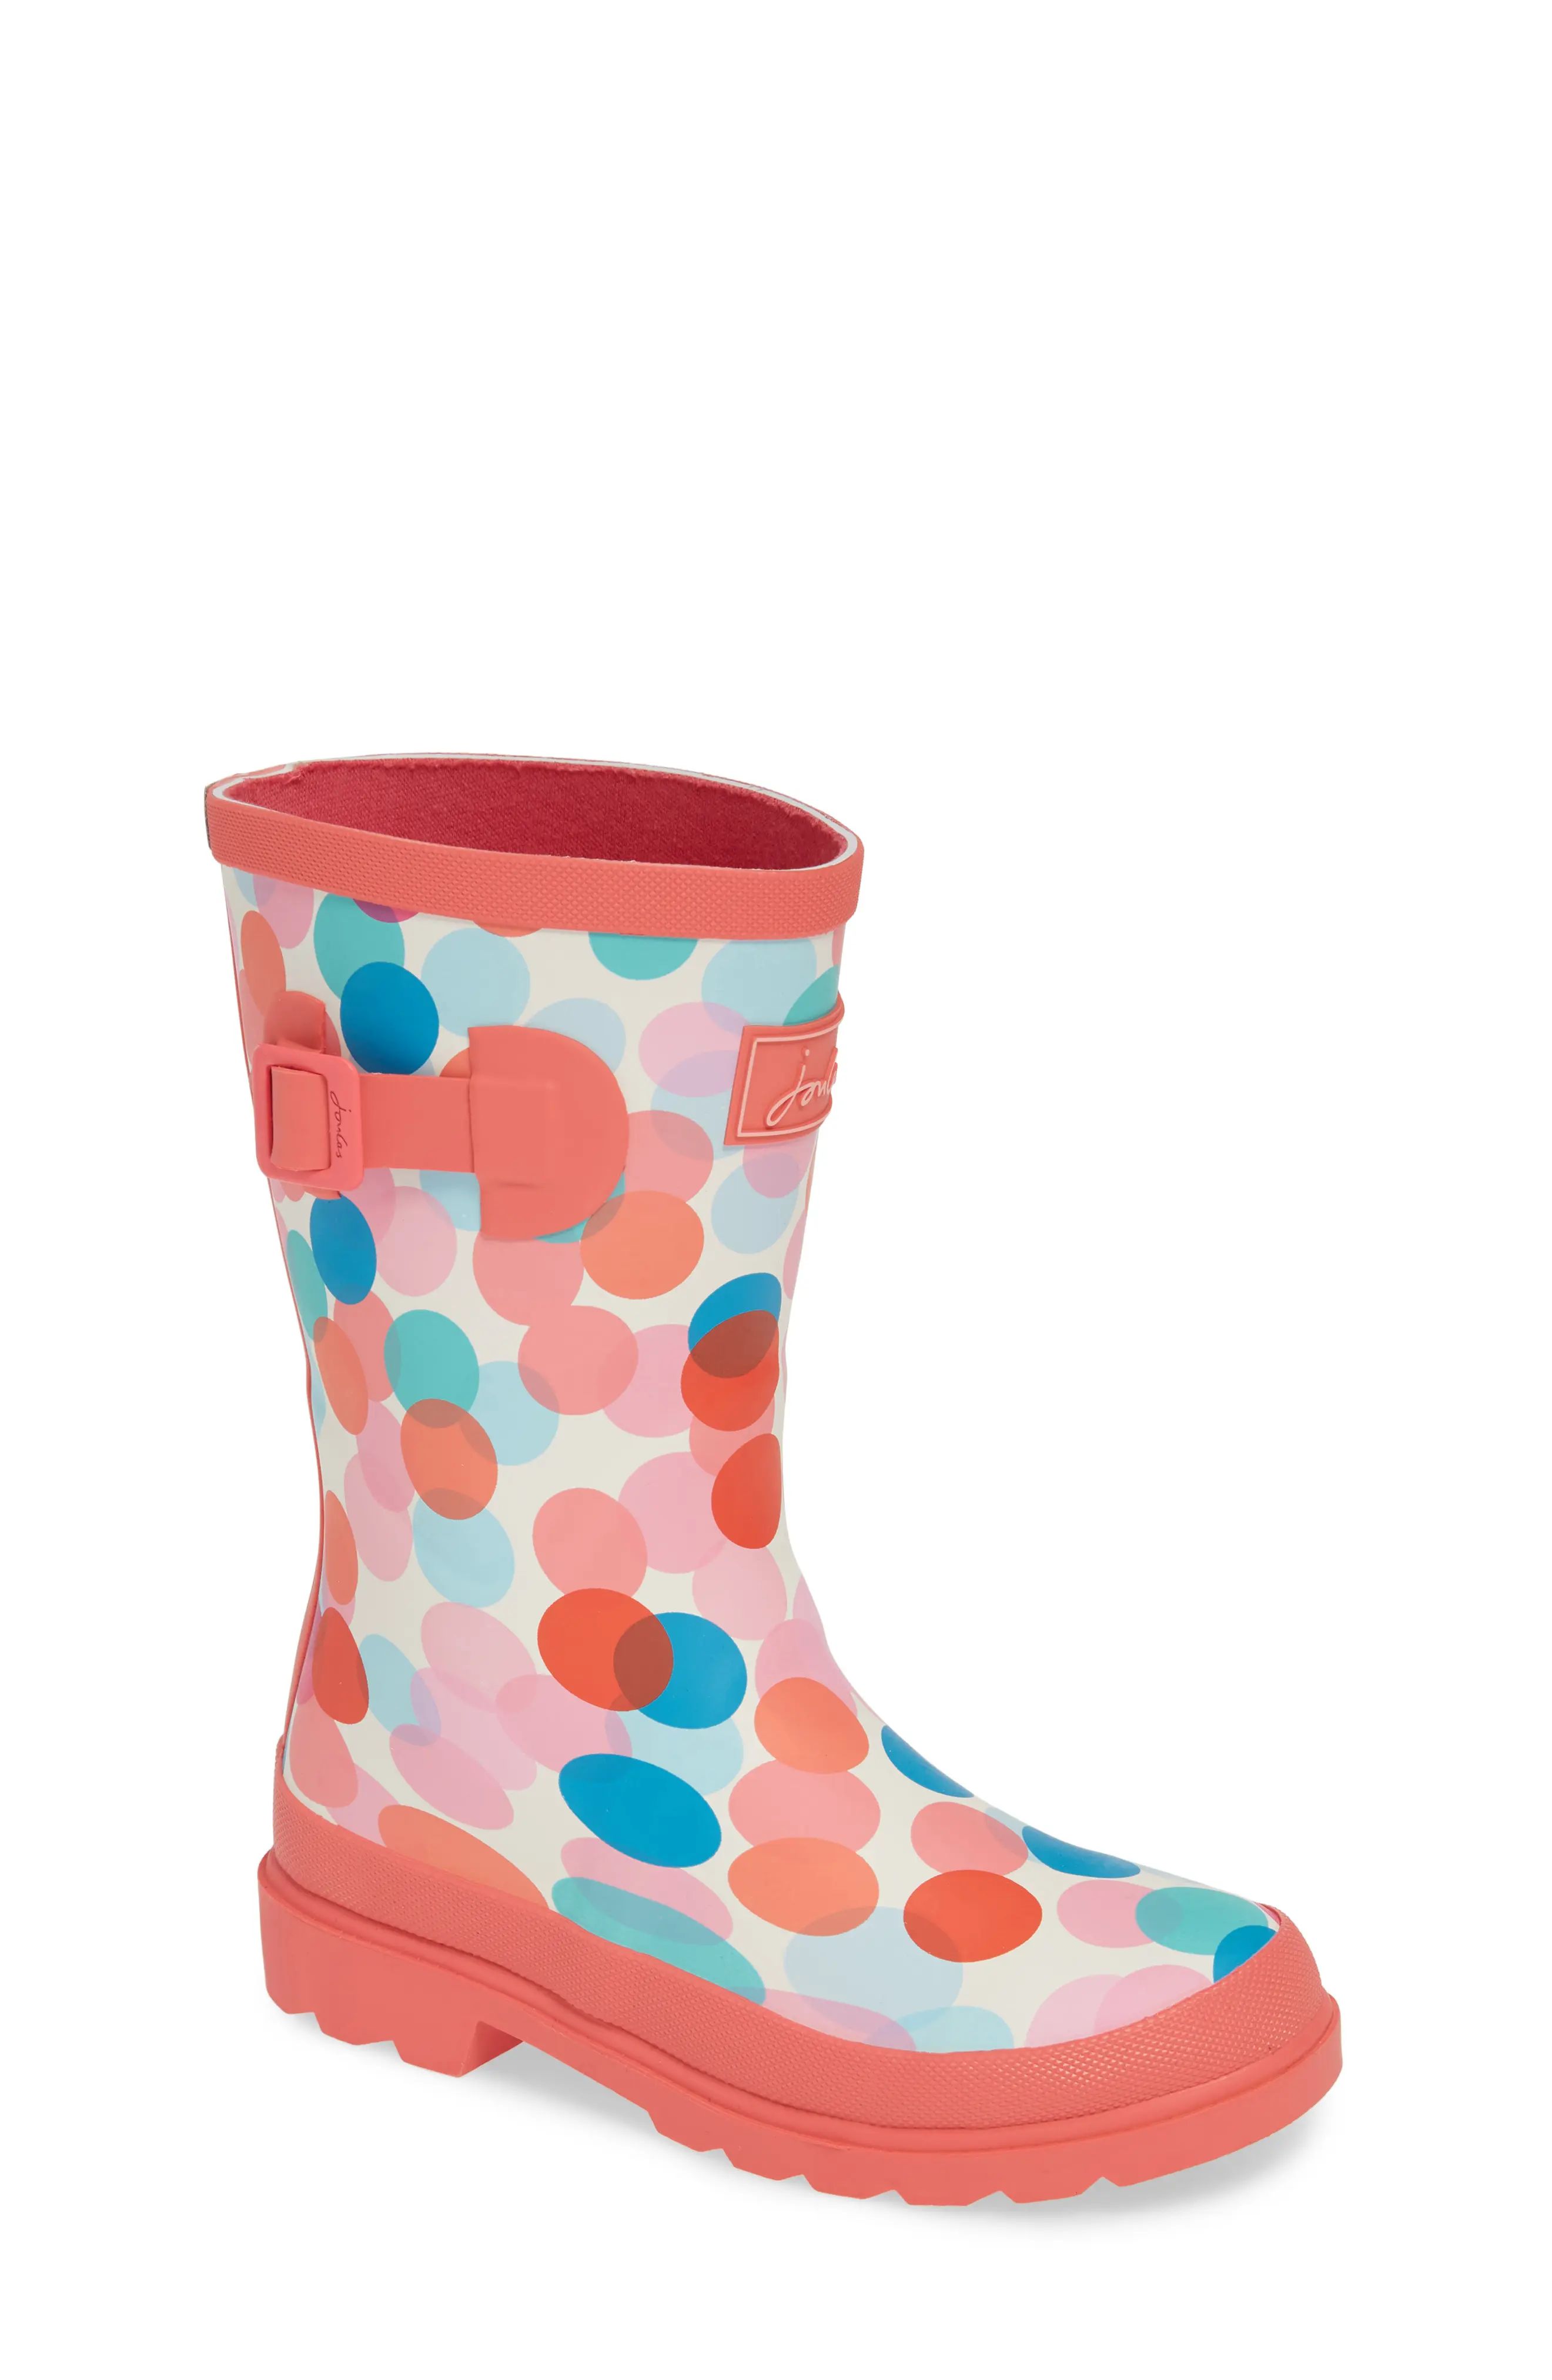 Girl's Joules Mid Height Print Welly Waterproof Rain Boot, Size 4 M - Coral | Nordstrom